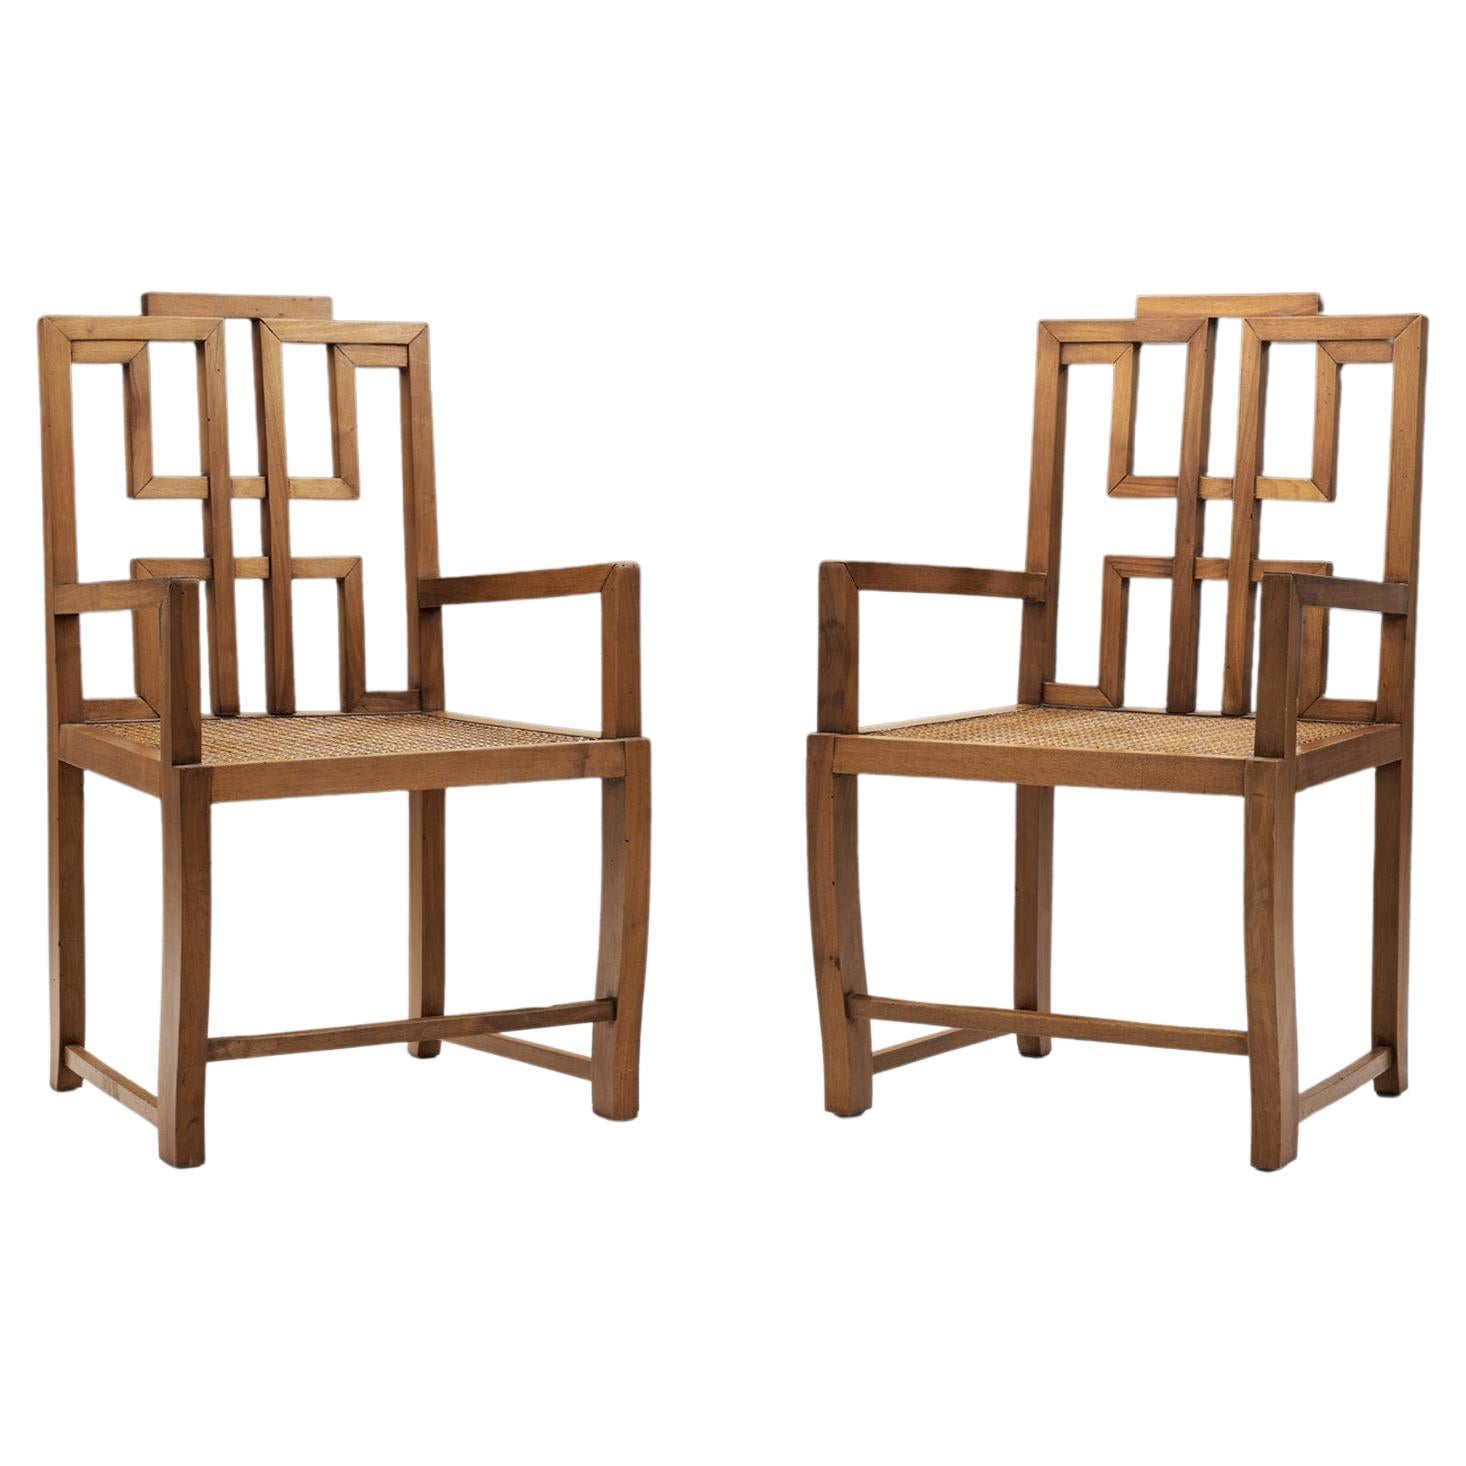 Late 20th Century Anglo-Chinese Chairs with Caned Seats, Europe 1980s For Sale